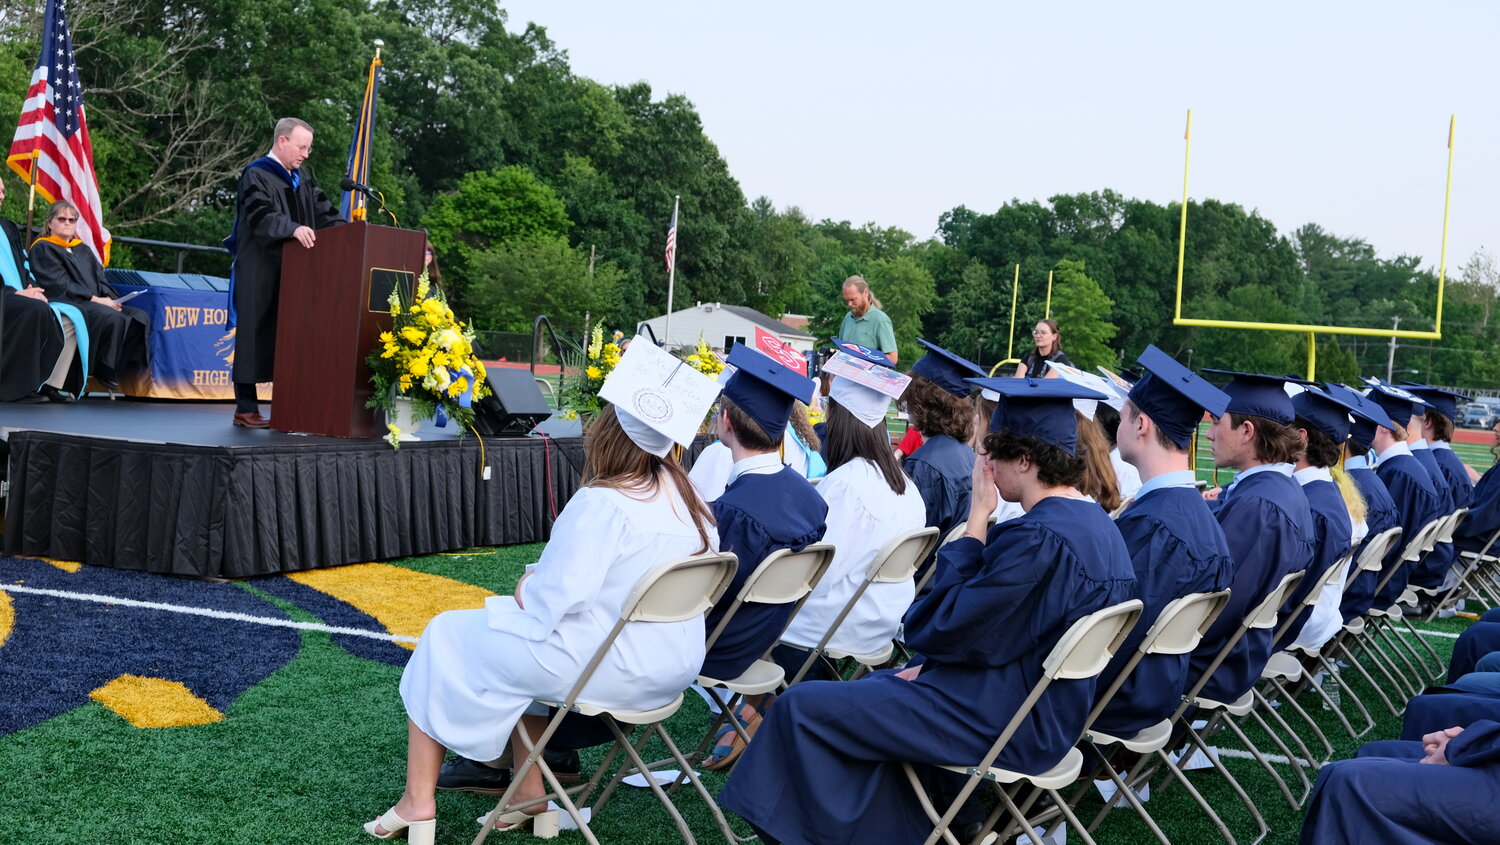 New Hope-Solebury School District superintendent Dr. Charles Lentz encourages the Class of 2023 to use what they learned in high school in the next chapter of their young lives.